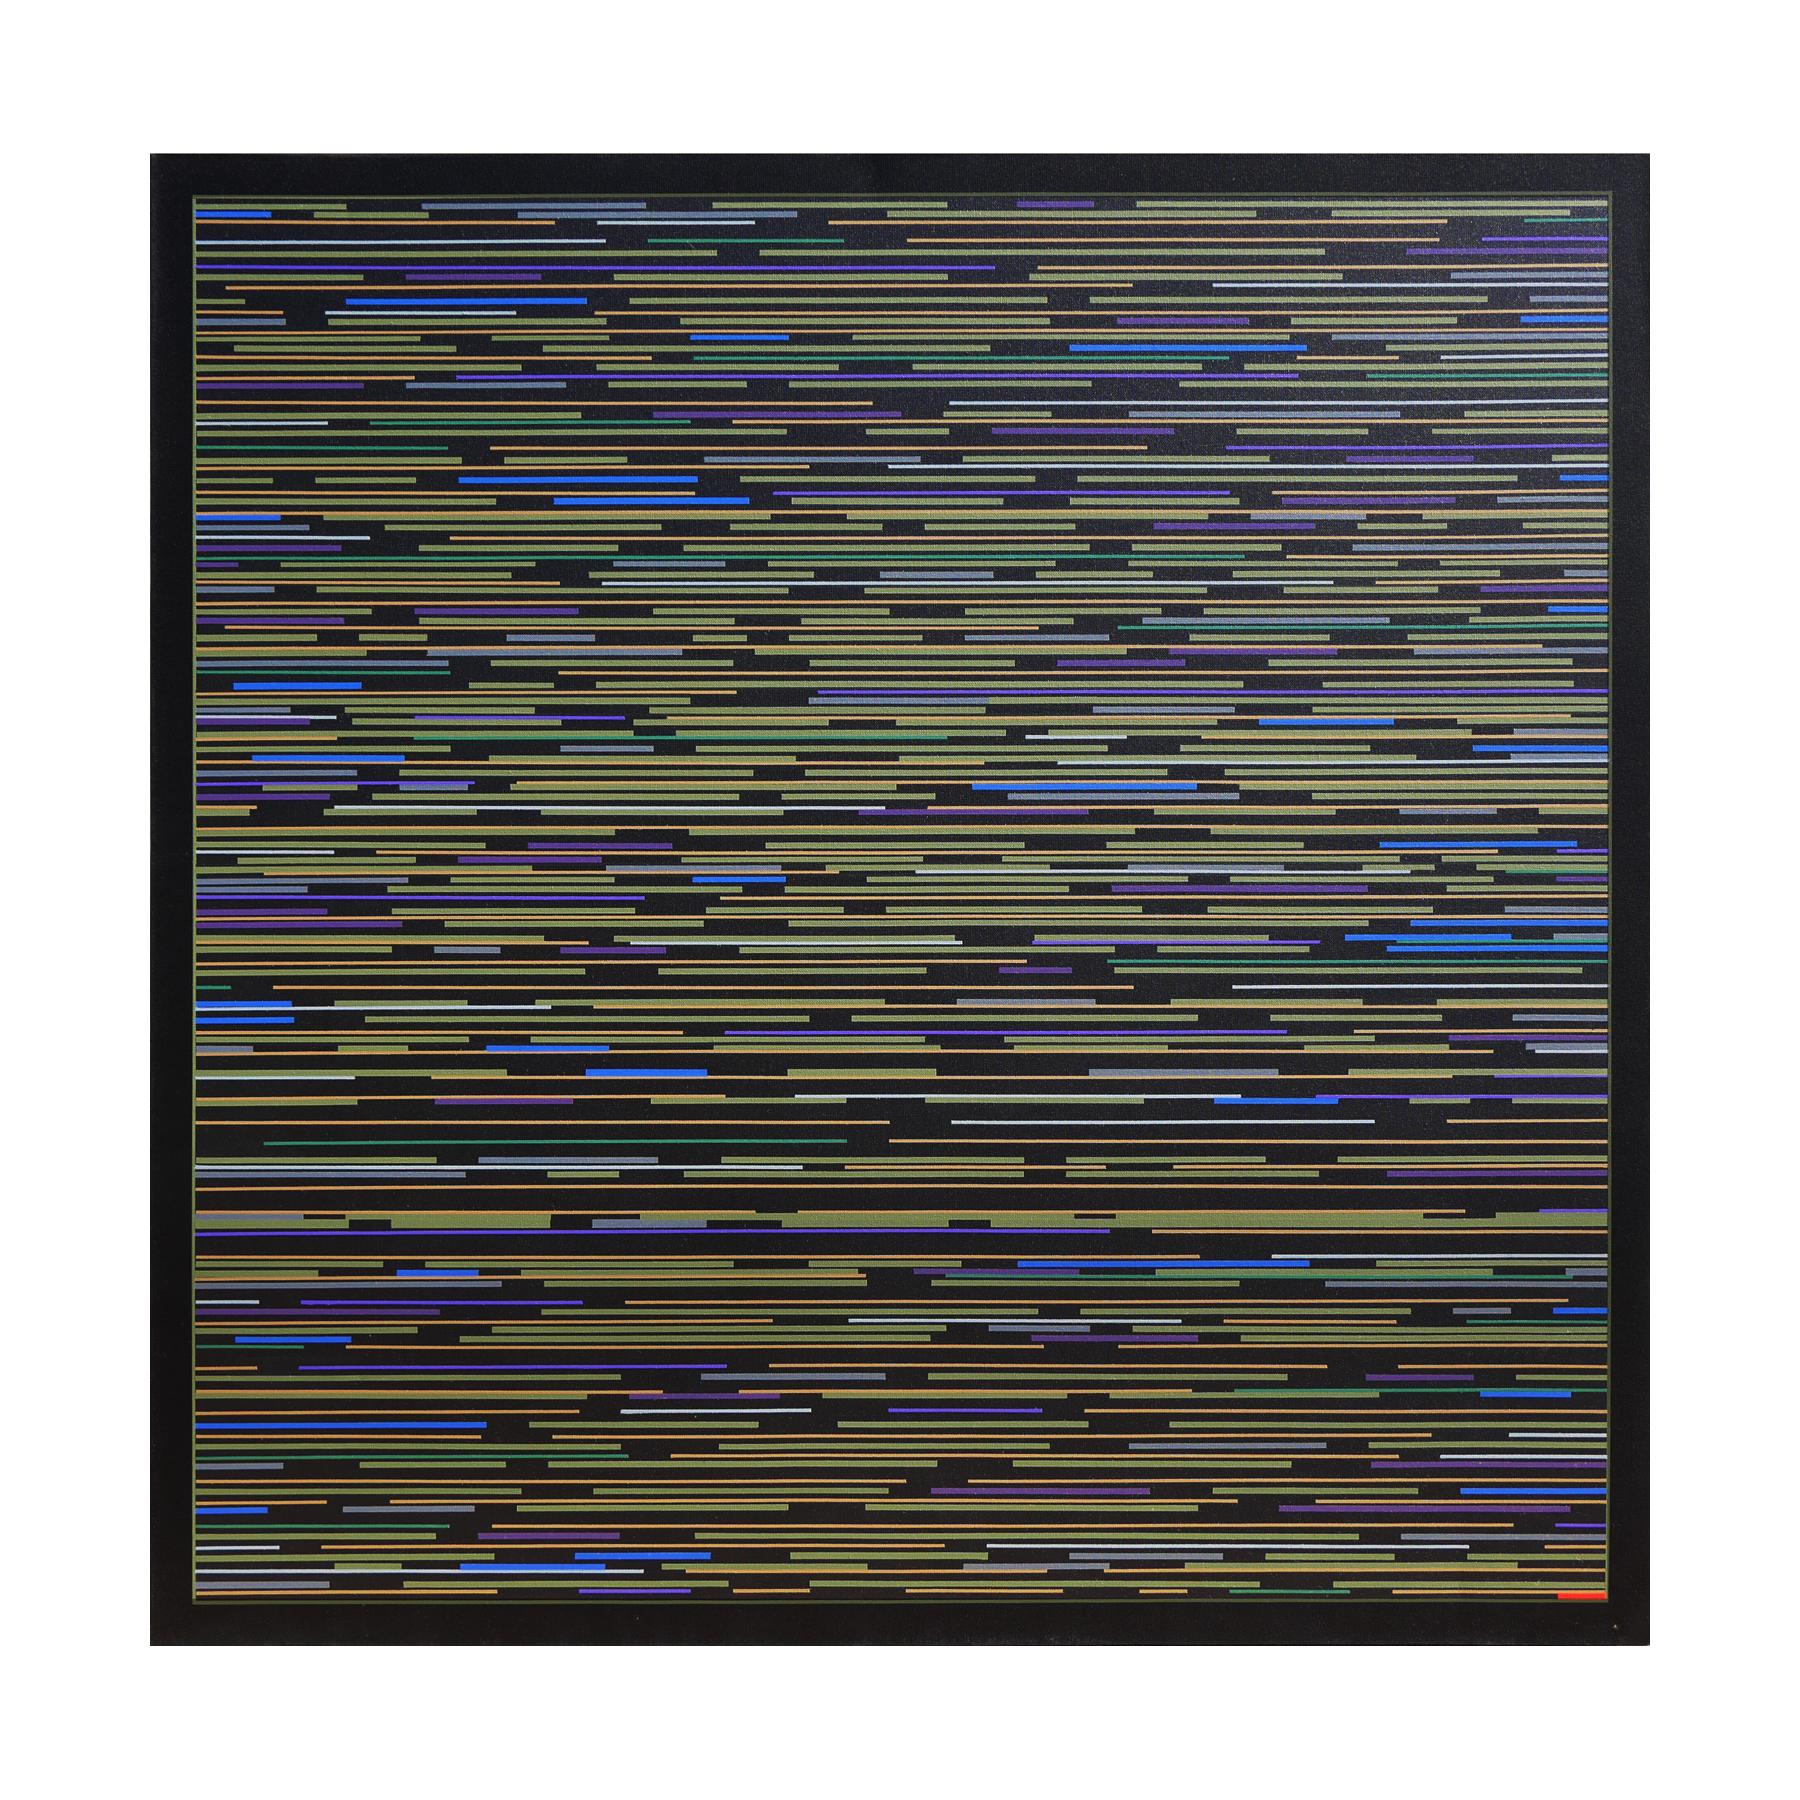 Contemporary abstract geometric painting by artist Mark Byckowski. The work is featured in a series of paintings. The work features horizontal lines with a variety of vivid colors of green, yellow, and blue, painted on a black background. Each work